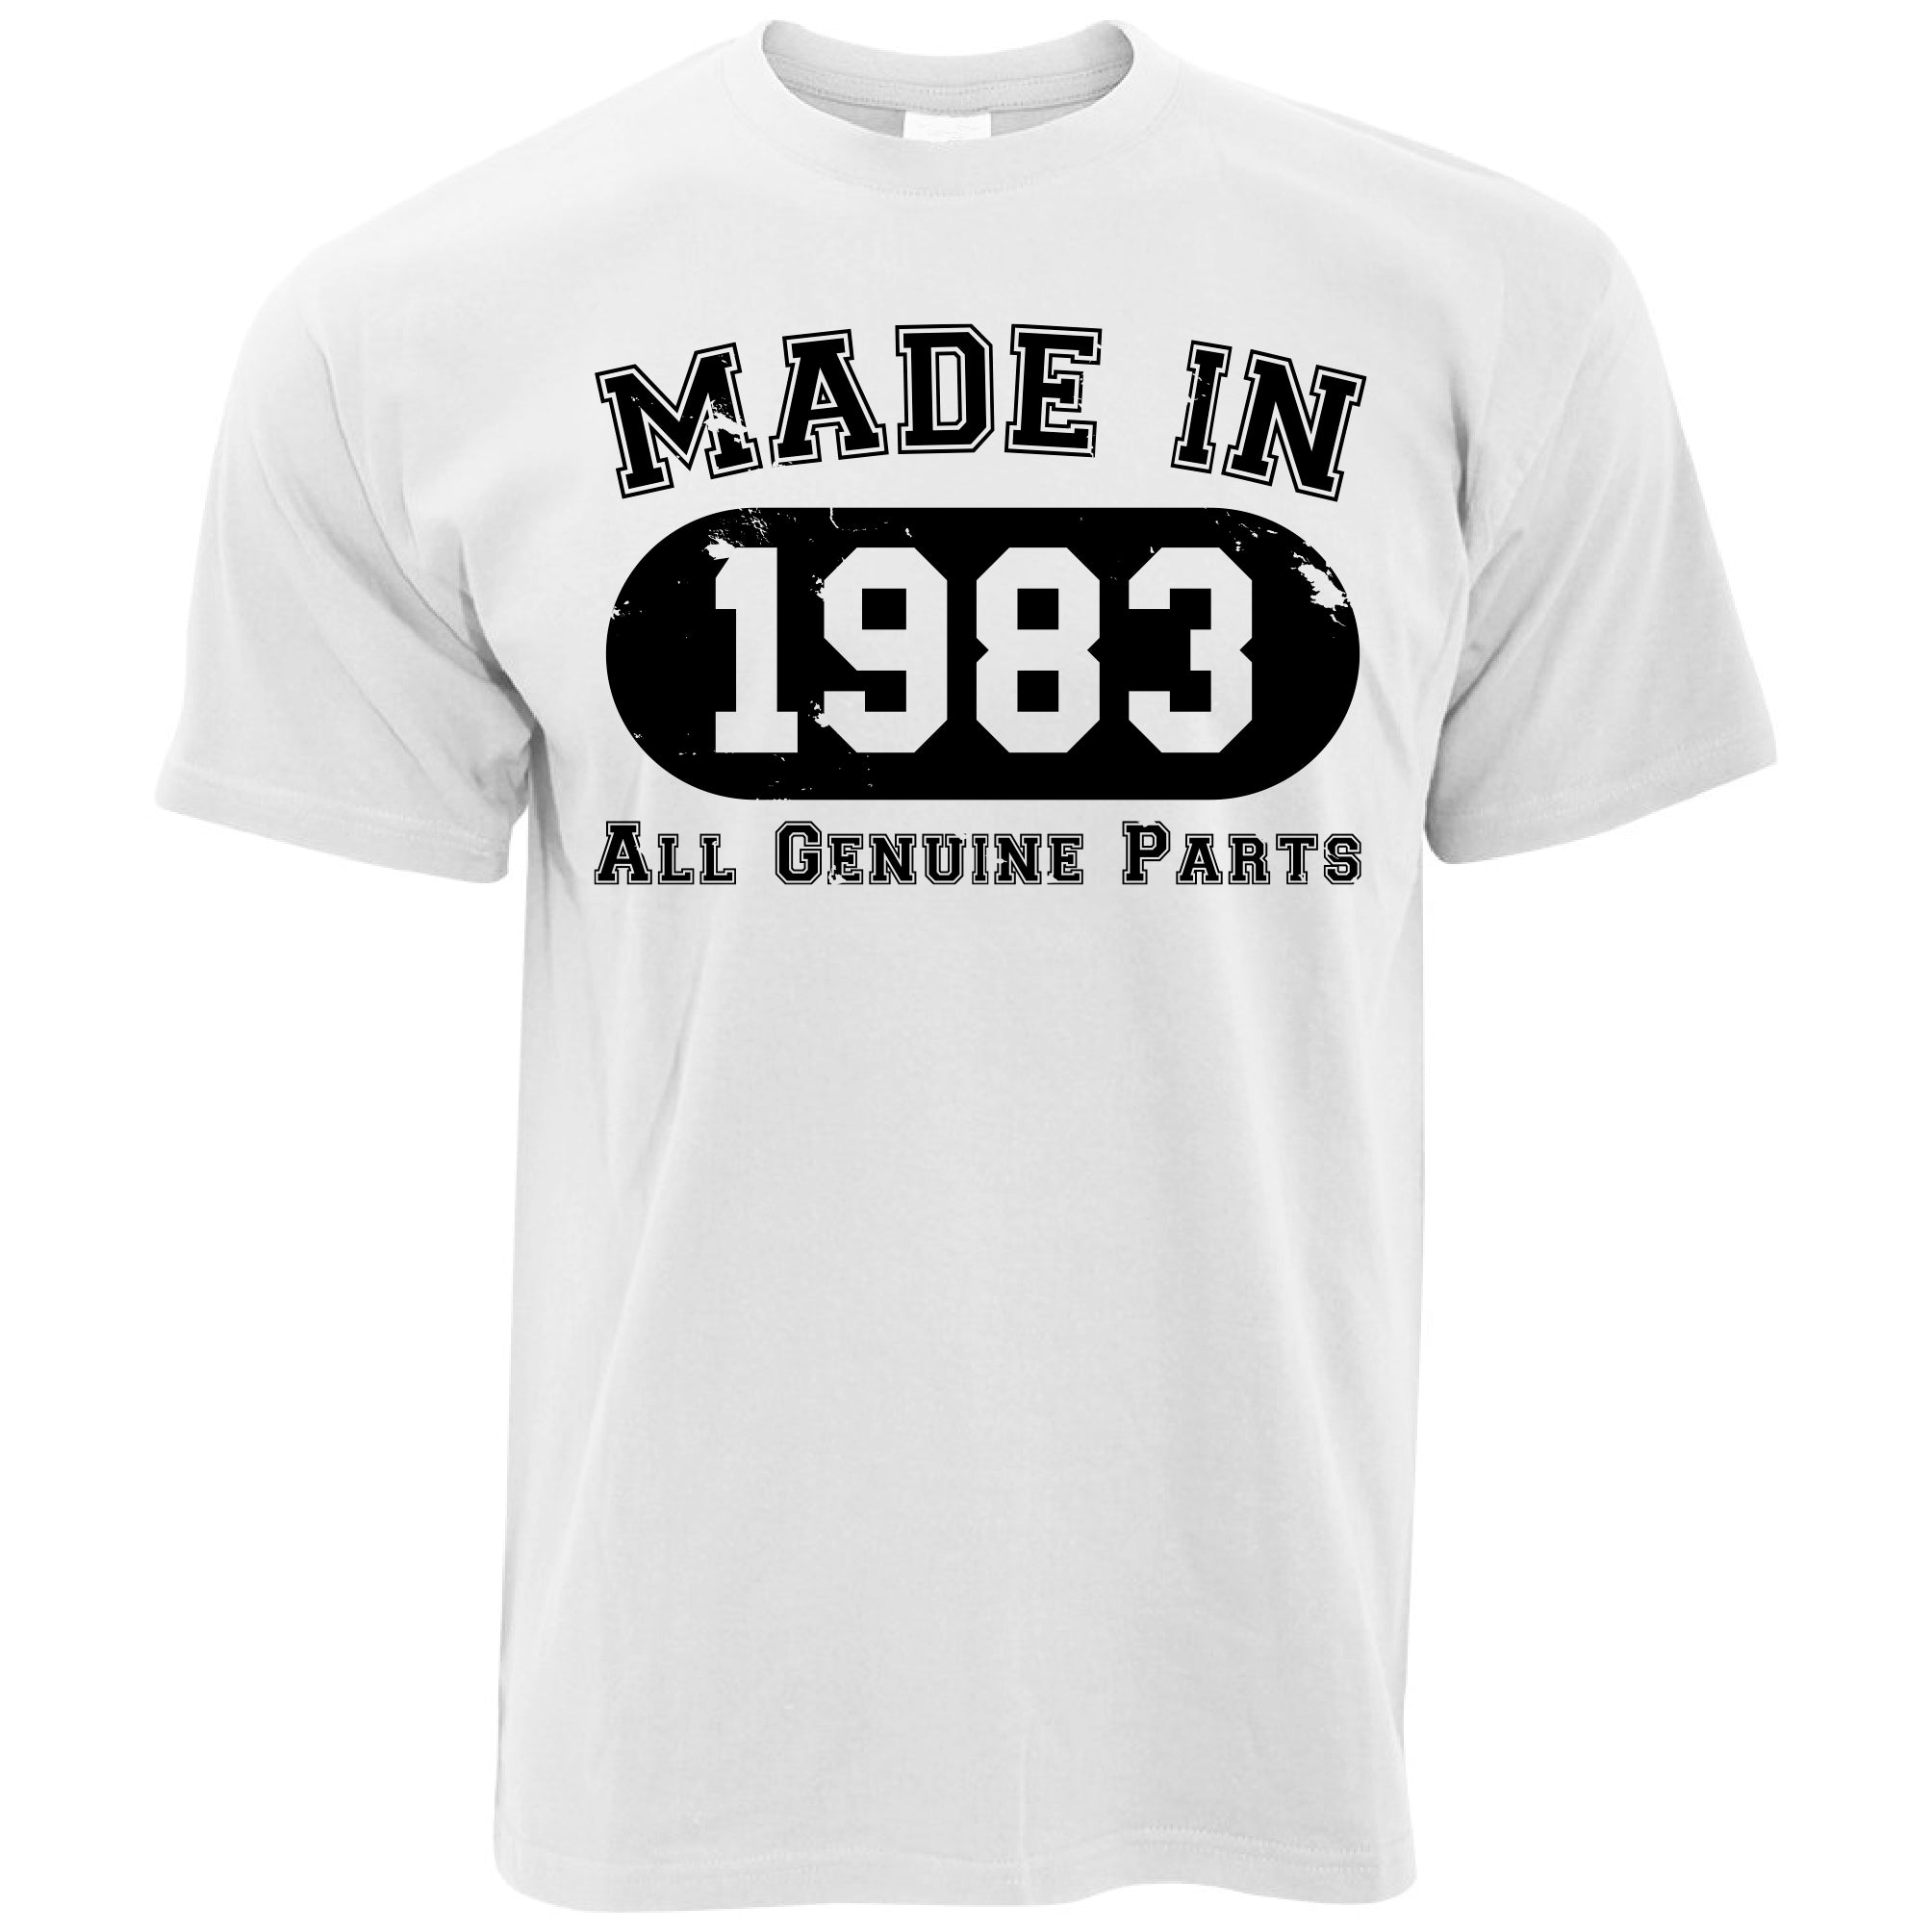 40th Birthday T Shirt Made in 1983 - All Genuine Parts